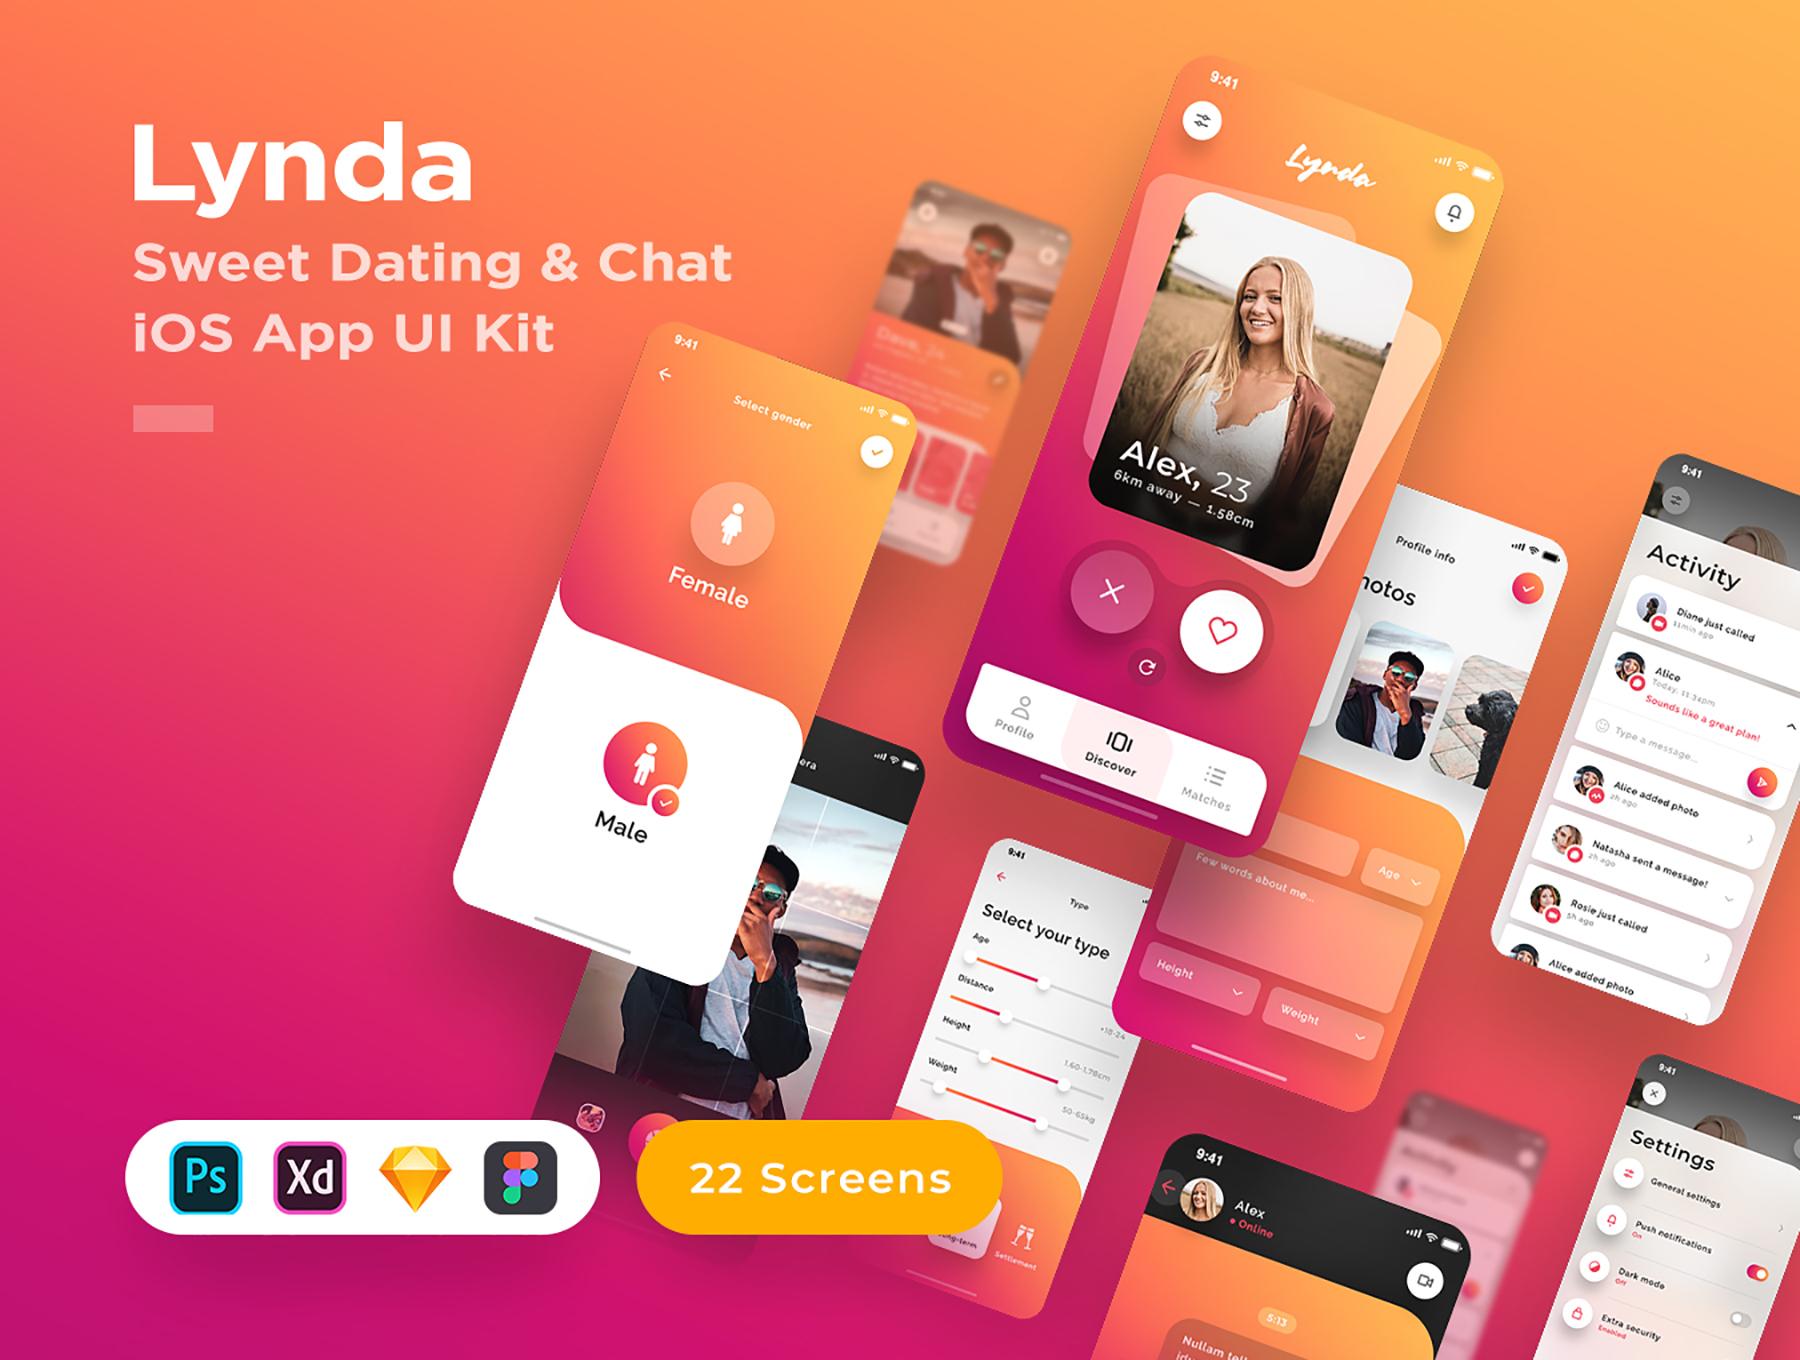 55 dating sites